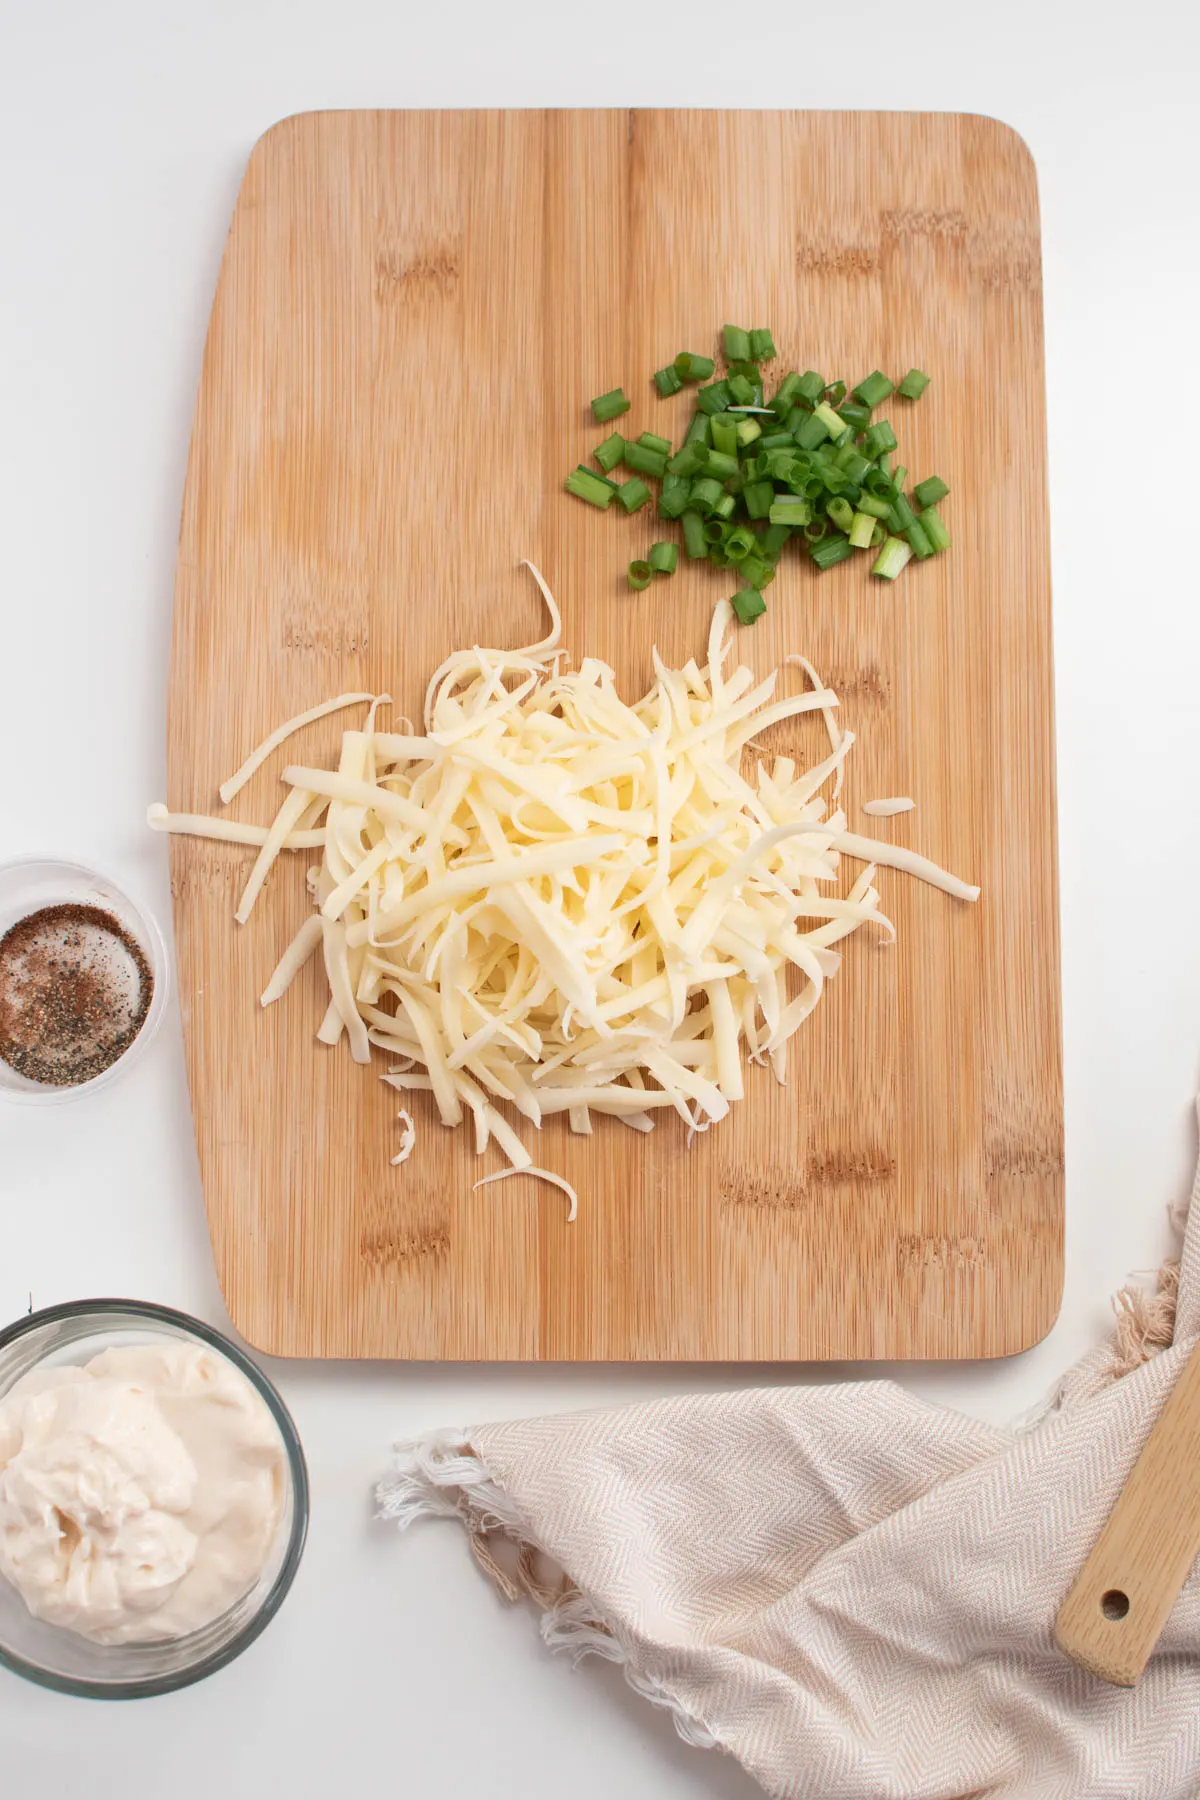 Piles of shredded Swiss cheese and chopped green onions on wood cutting board surrounded by bowls of ingredients.